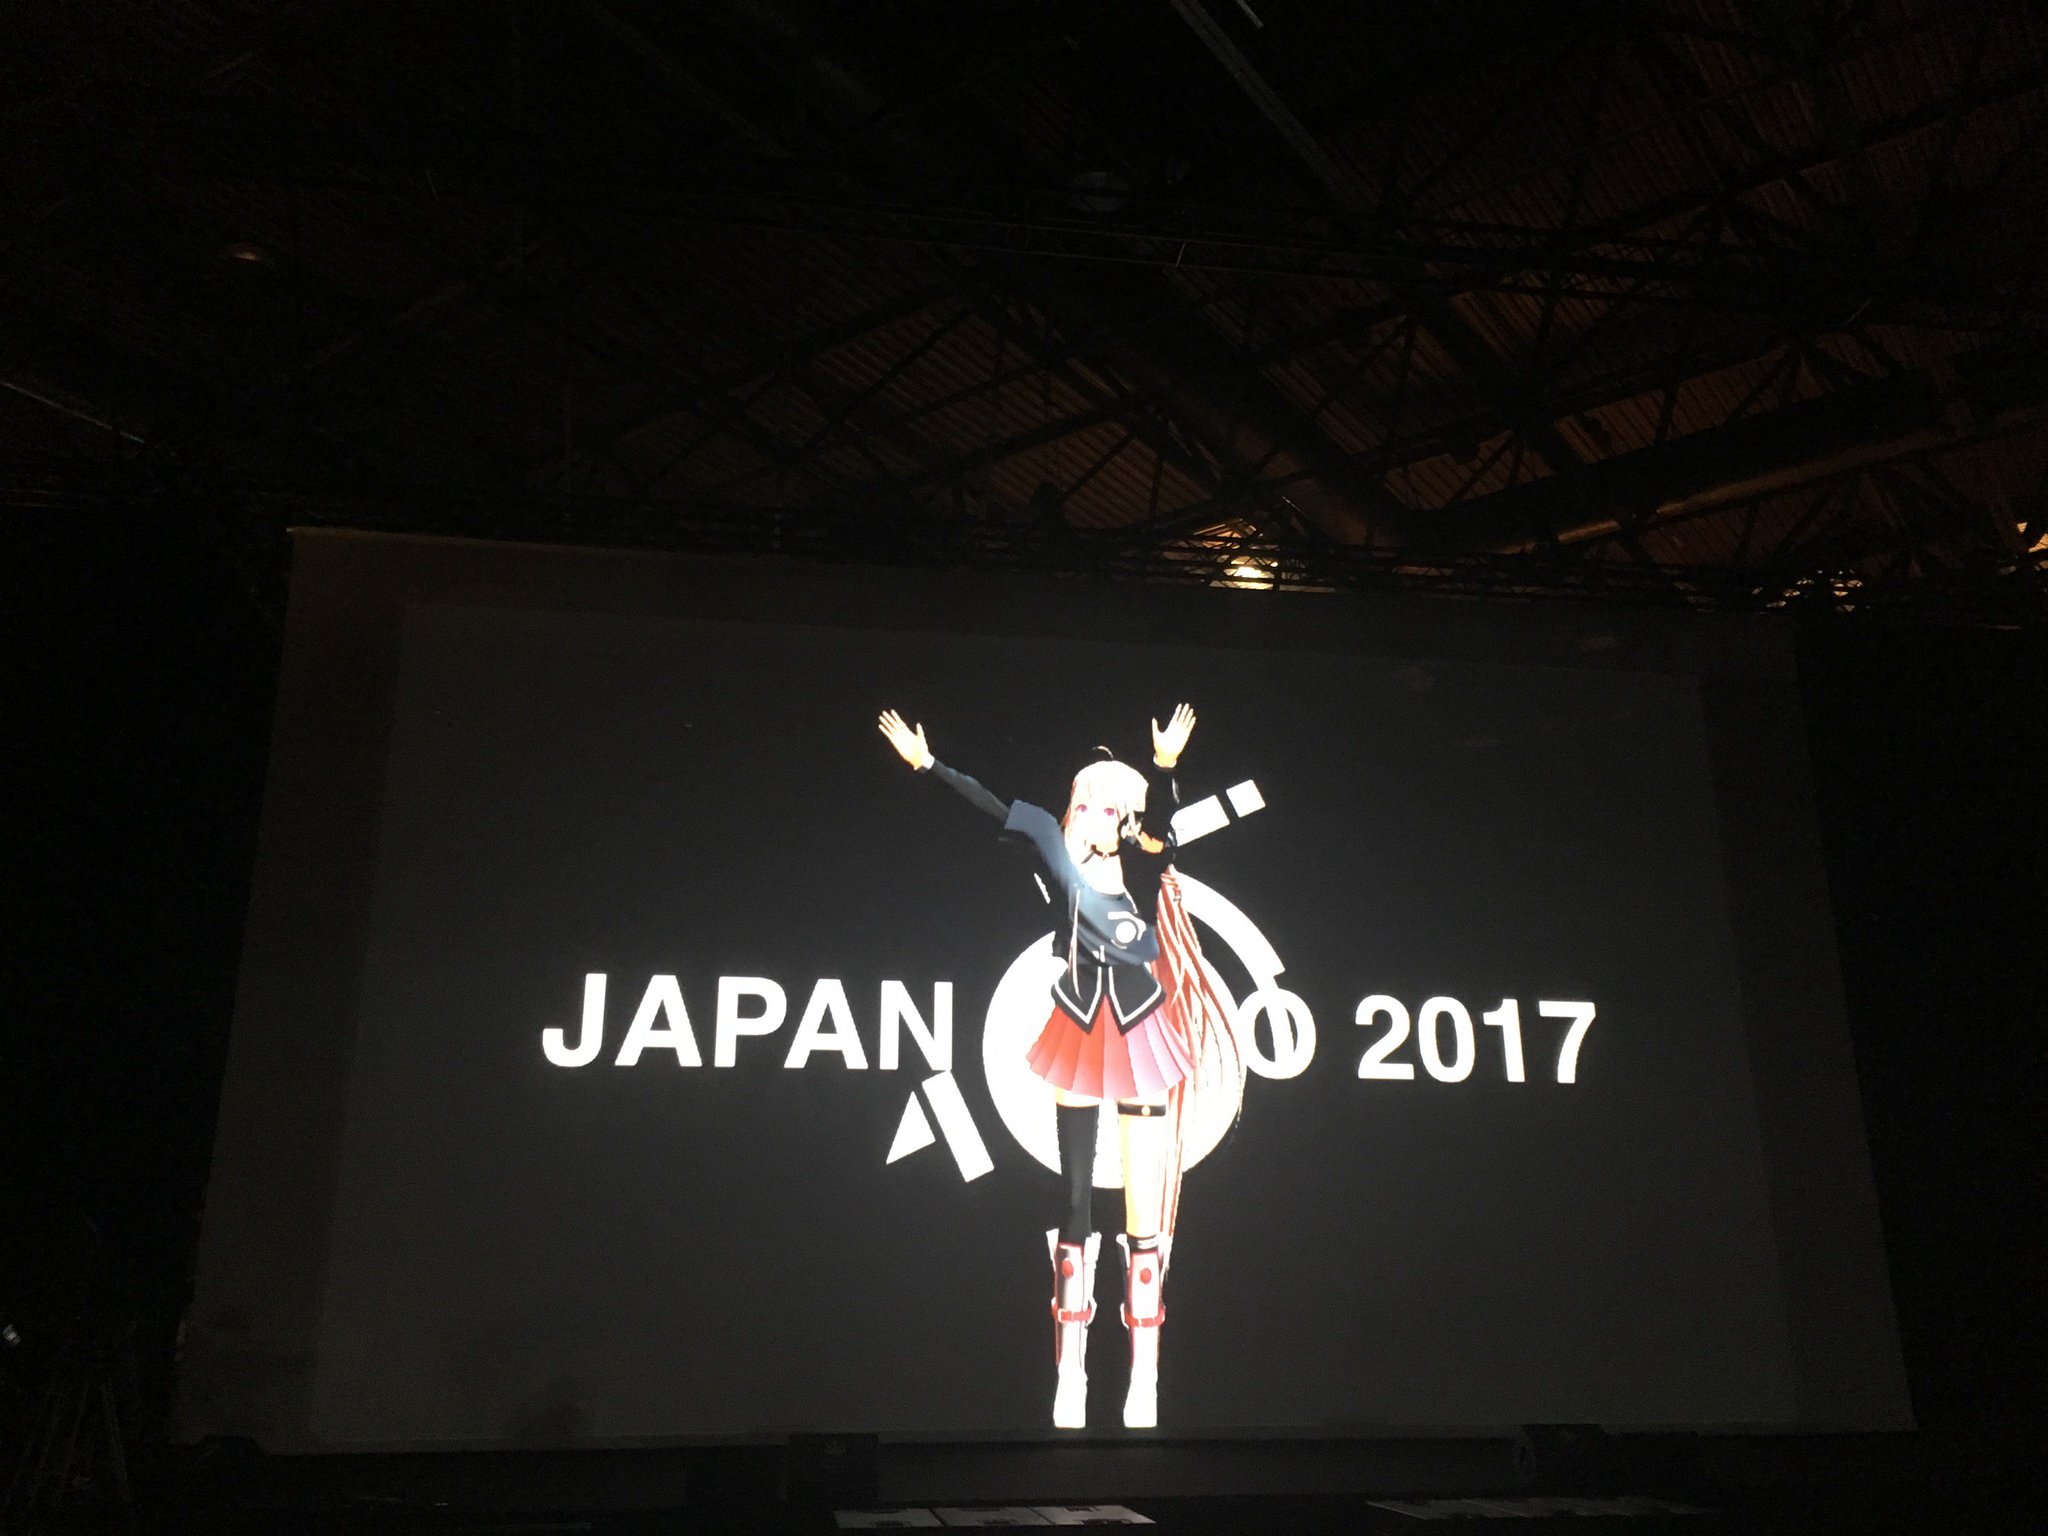 1st Place Aria Ia Musical Live Show 好評発売中 Hello Everybody Ready For Ia S Screening At Yuzu Stage Japan Expo Today See You There At 12 15 Don T Miss It Japanexpo Ia T Co 9zdzjtjajv